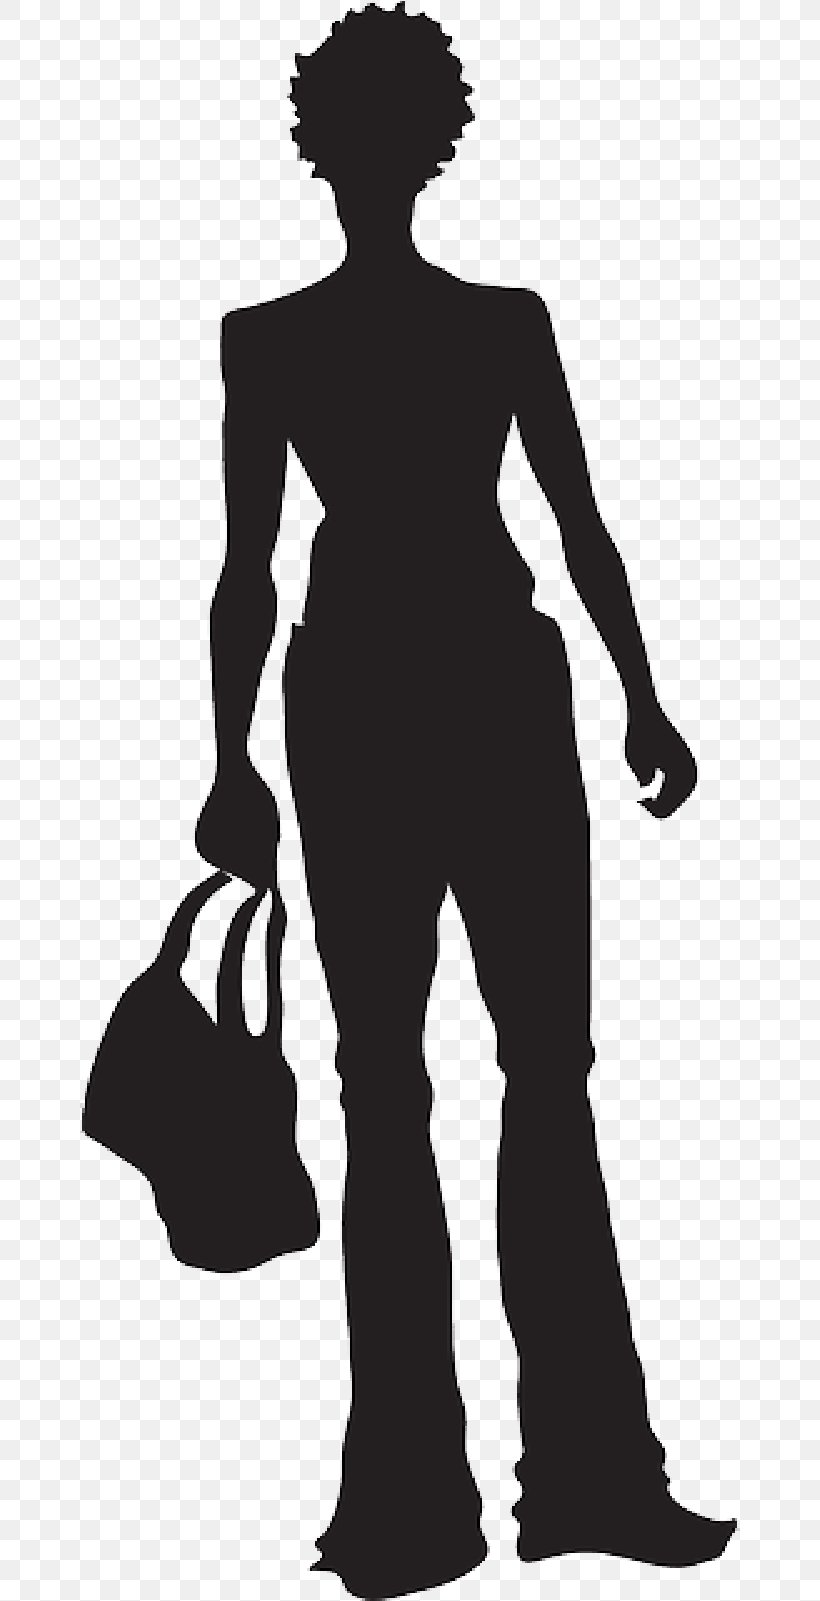 Money Bag, PNG, 661x1601px, Silhouette, Money Bag, Sleeve, Standing, Woman Download Free